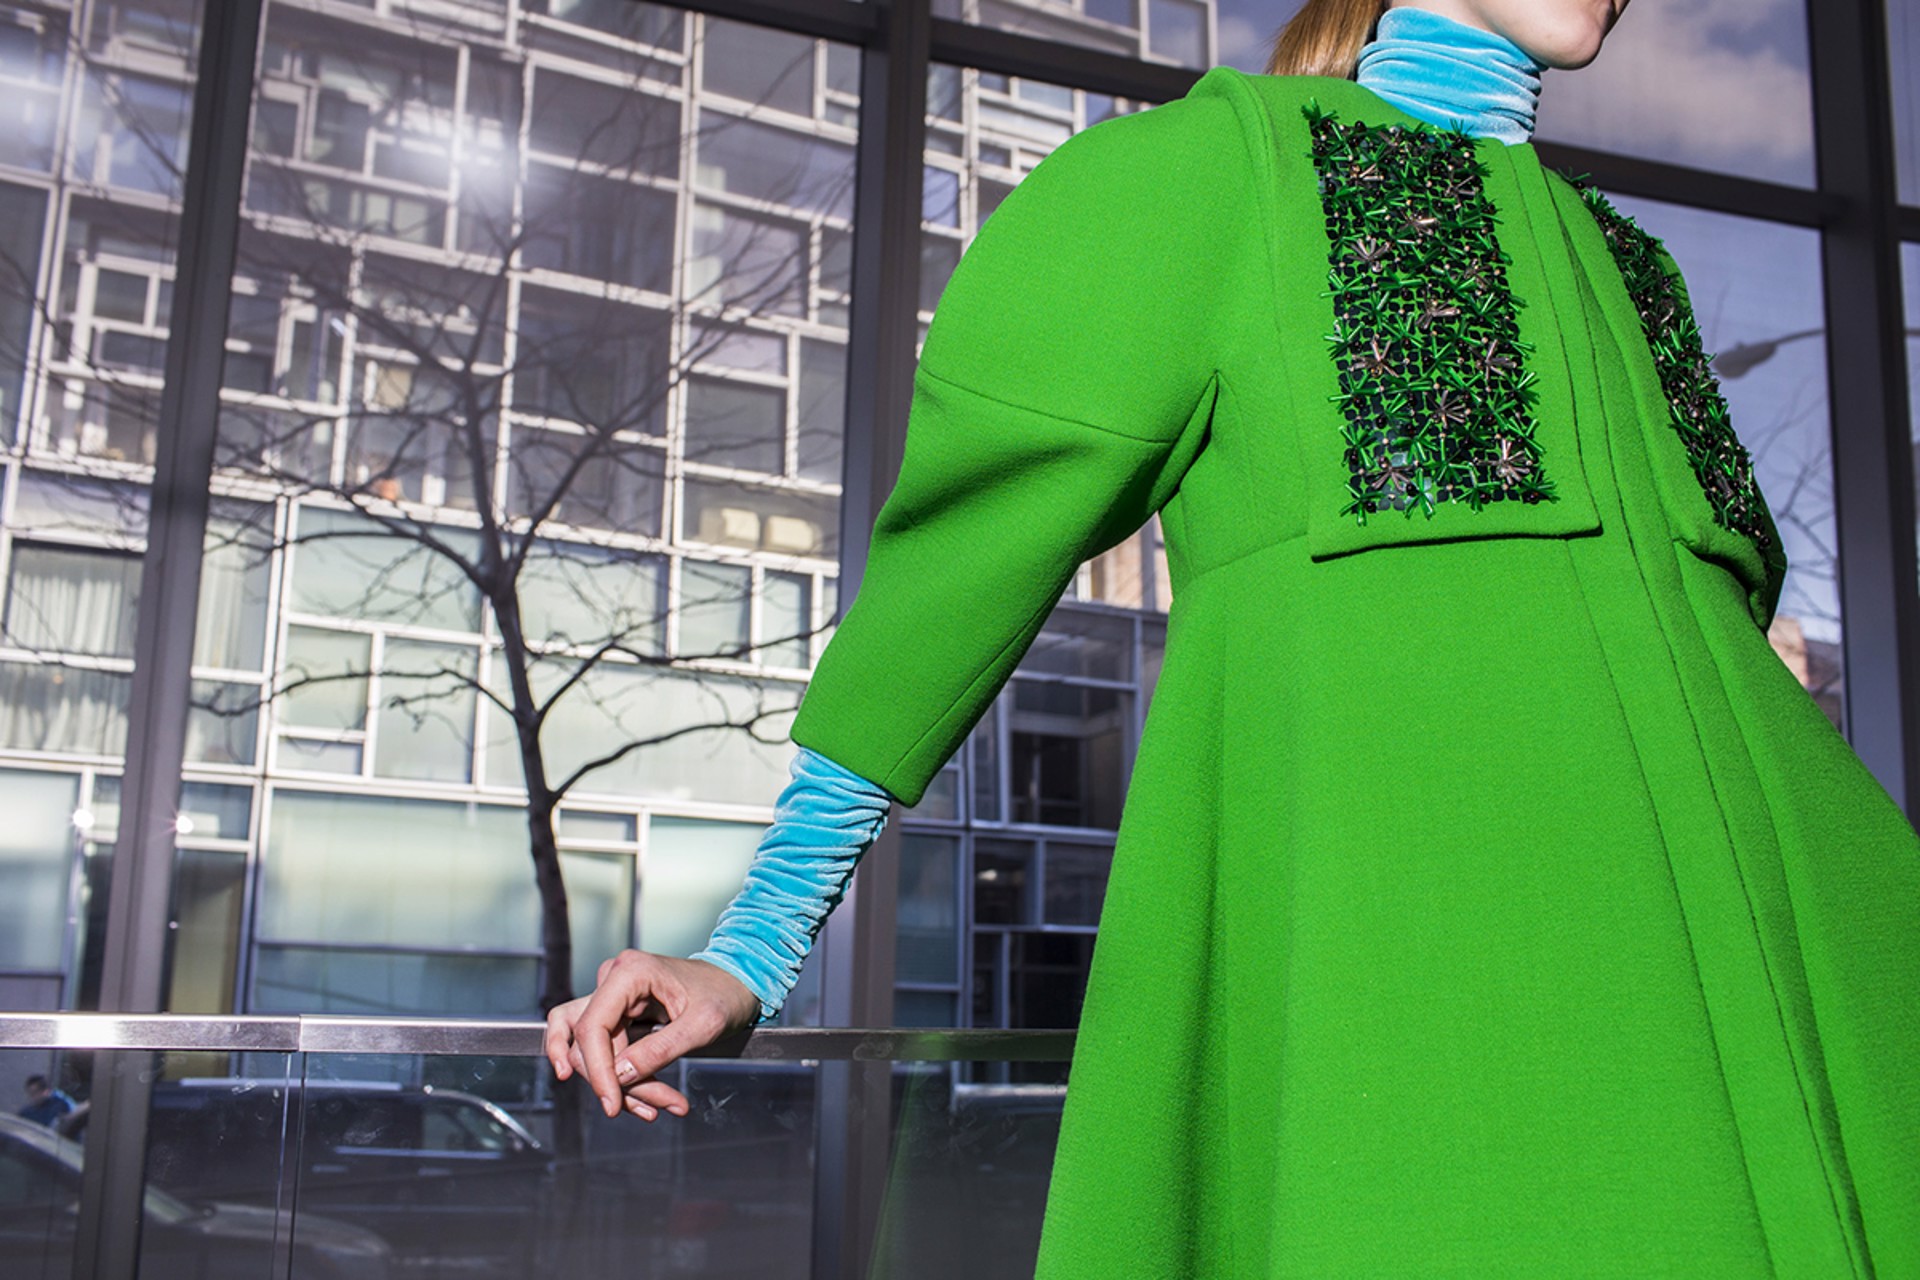 Delpozo (Green Top and Tree), Out of Fashion series, NYC by Landon Nordeman